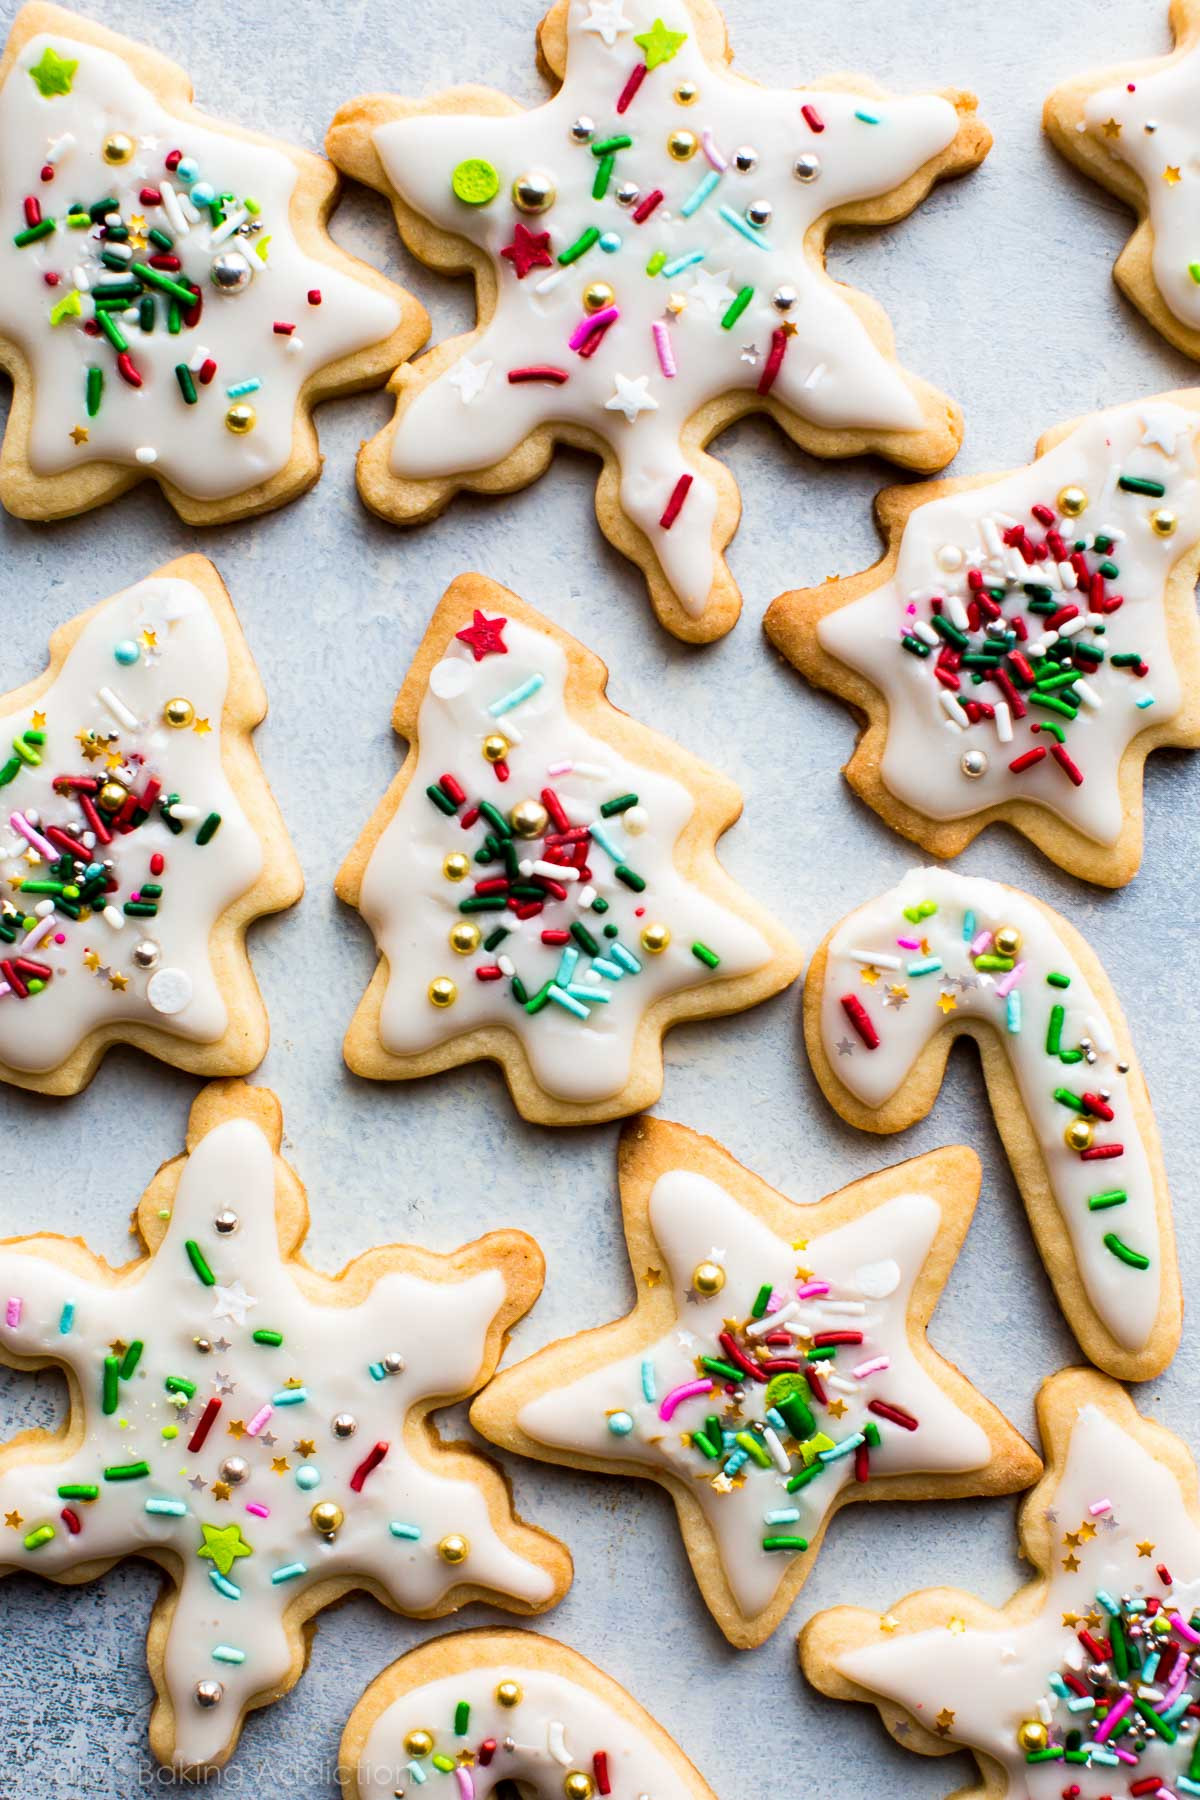 Baking For Christmas
 Holiday Cut Out Sugar Cookies with Easy Icing Sallys